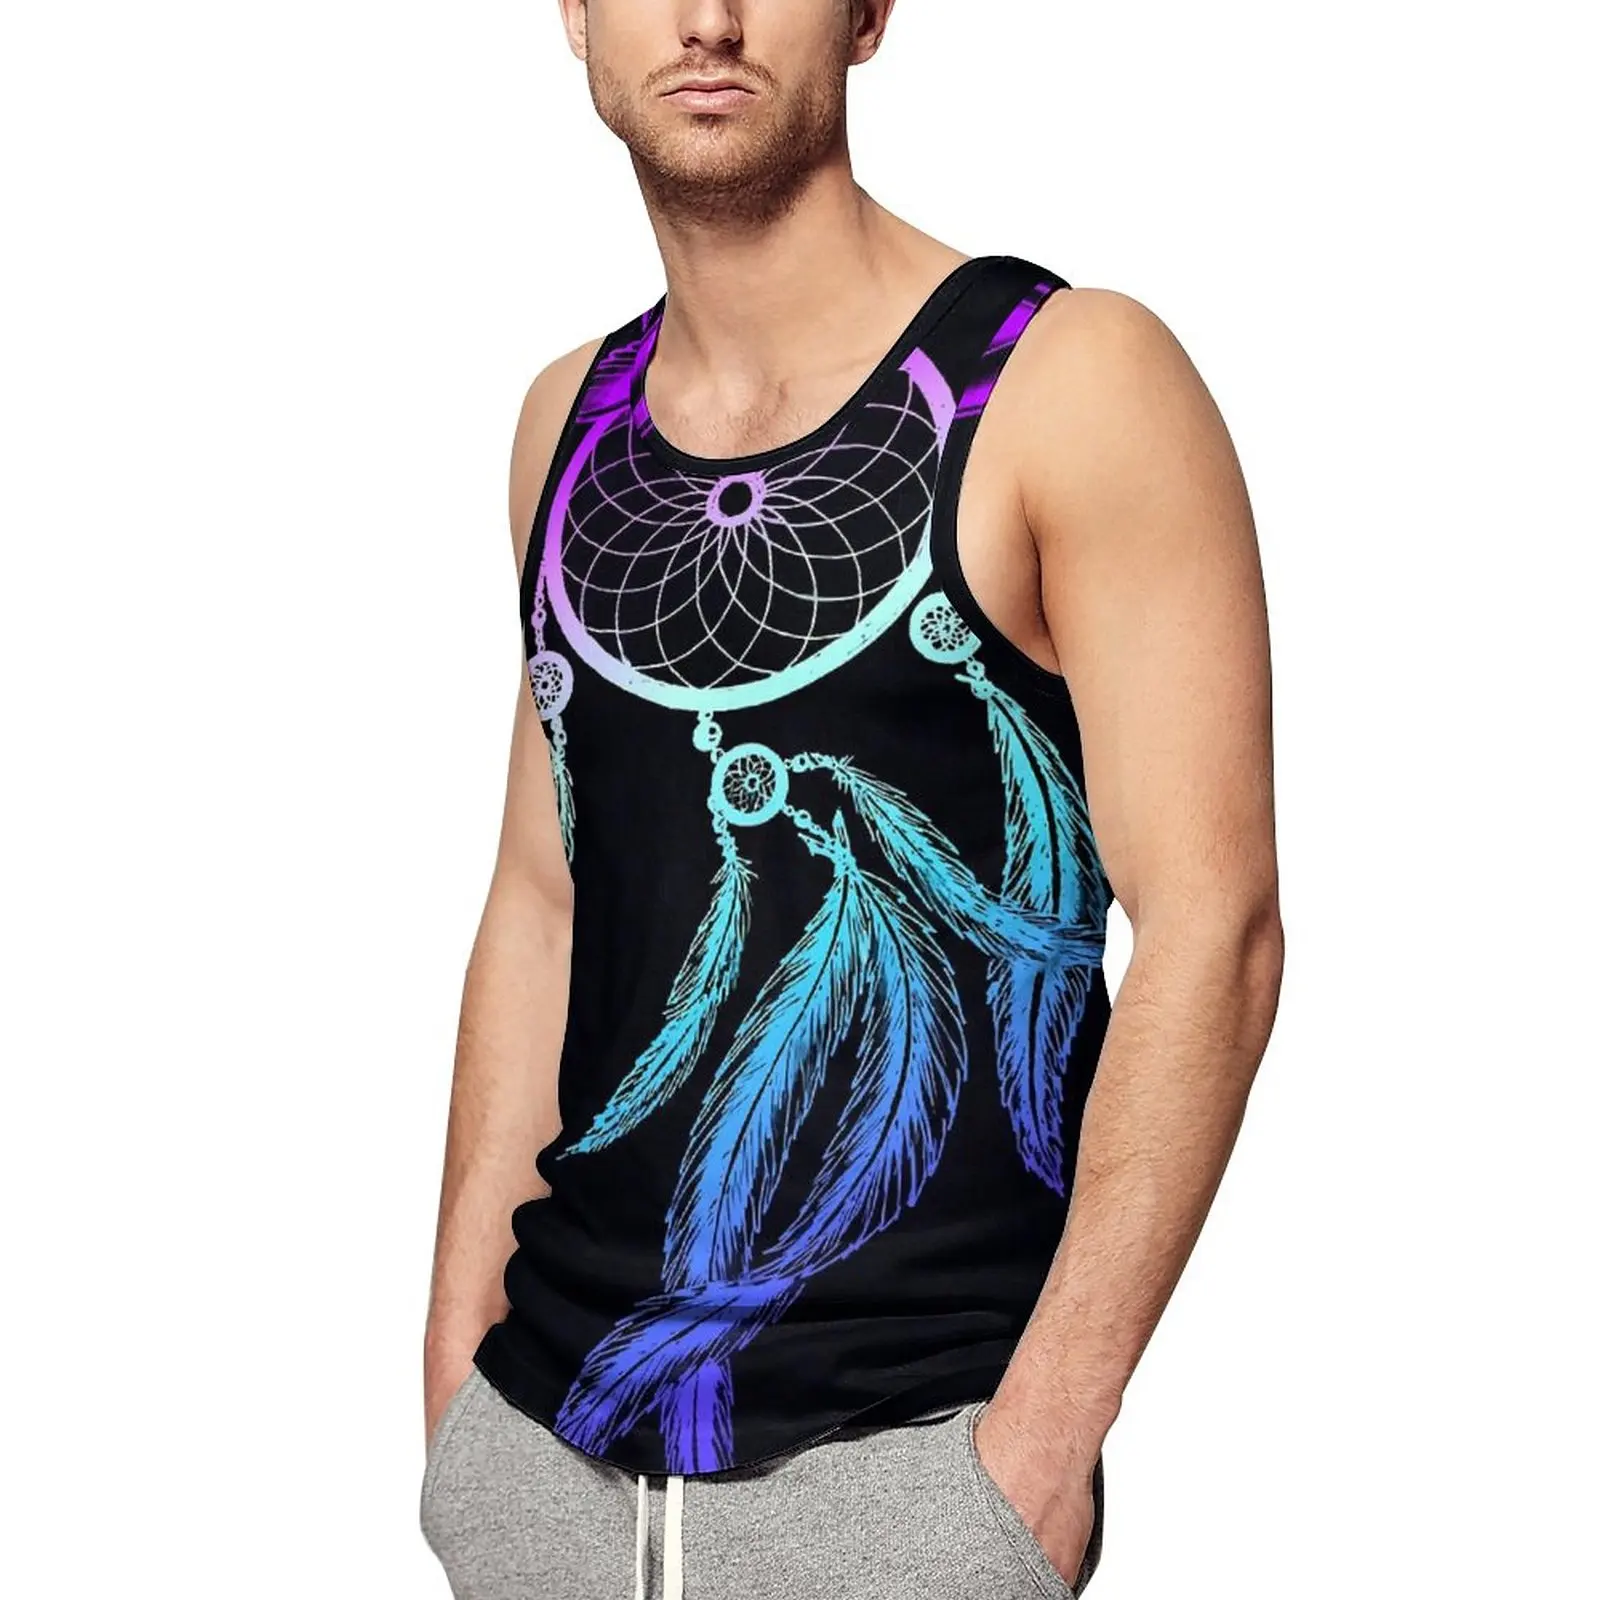 

Dream Catcher Tank Top Man Colorful Print Workout Oversized Tops Beach Trendy Design Sleeveless Vests